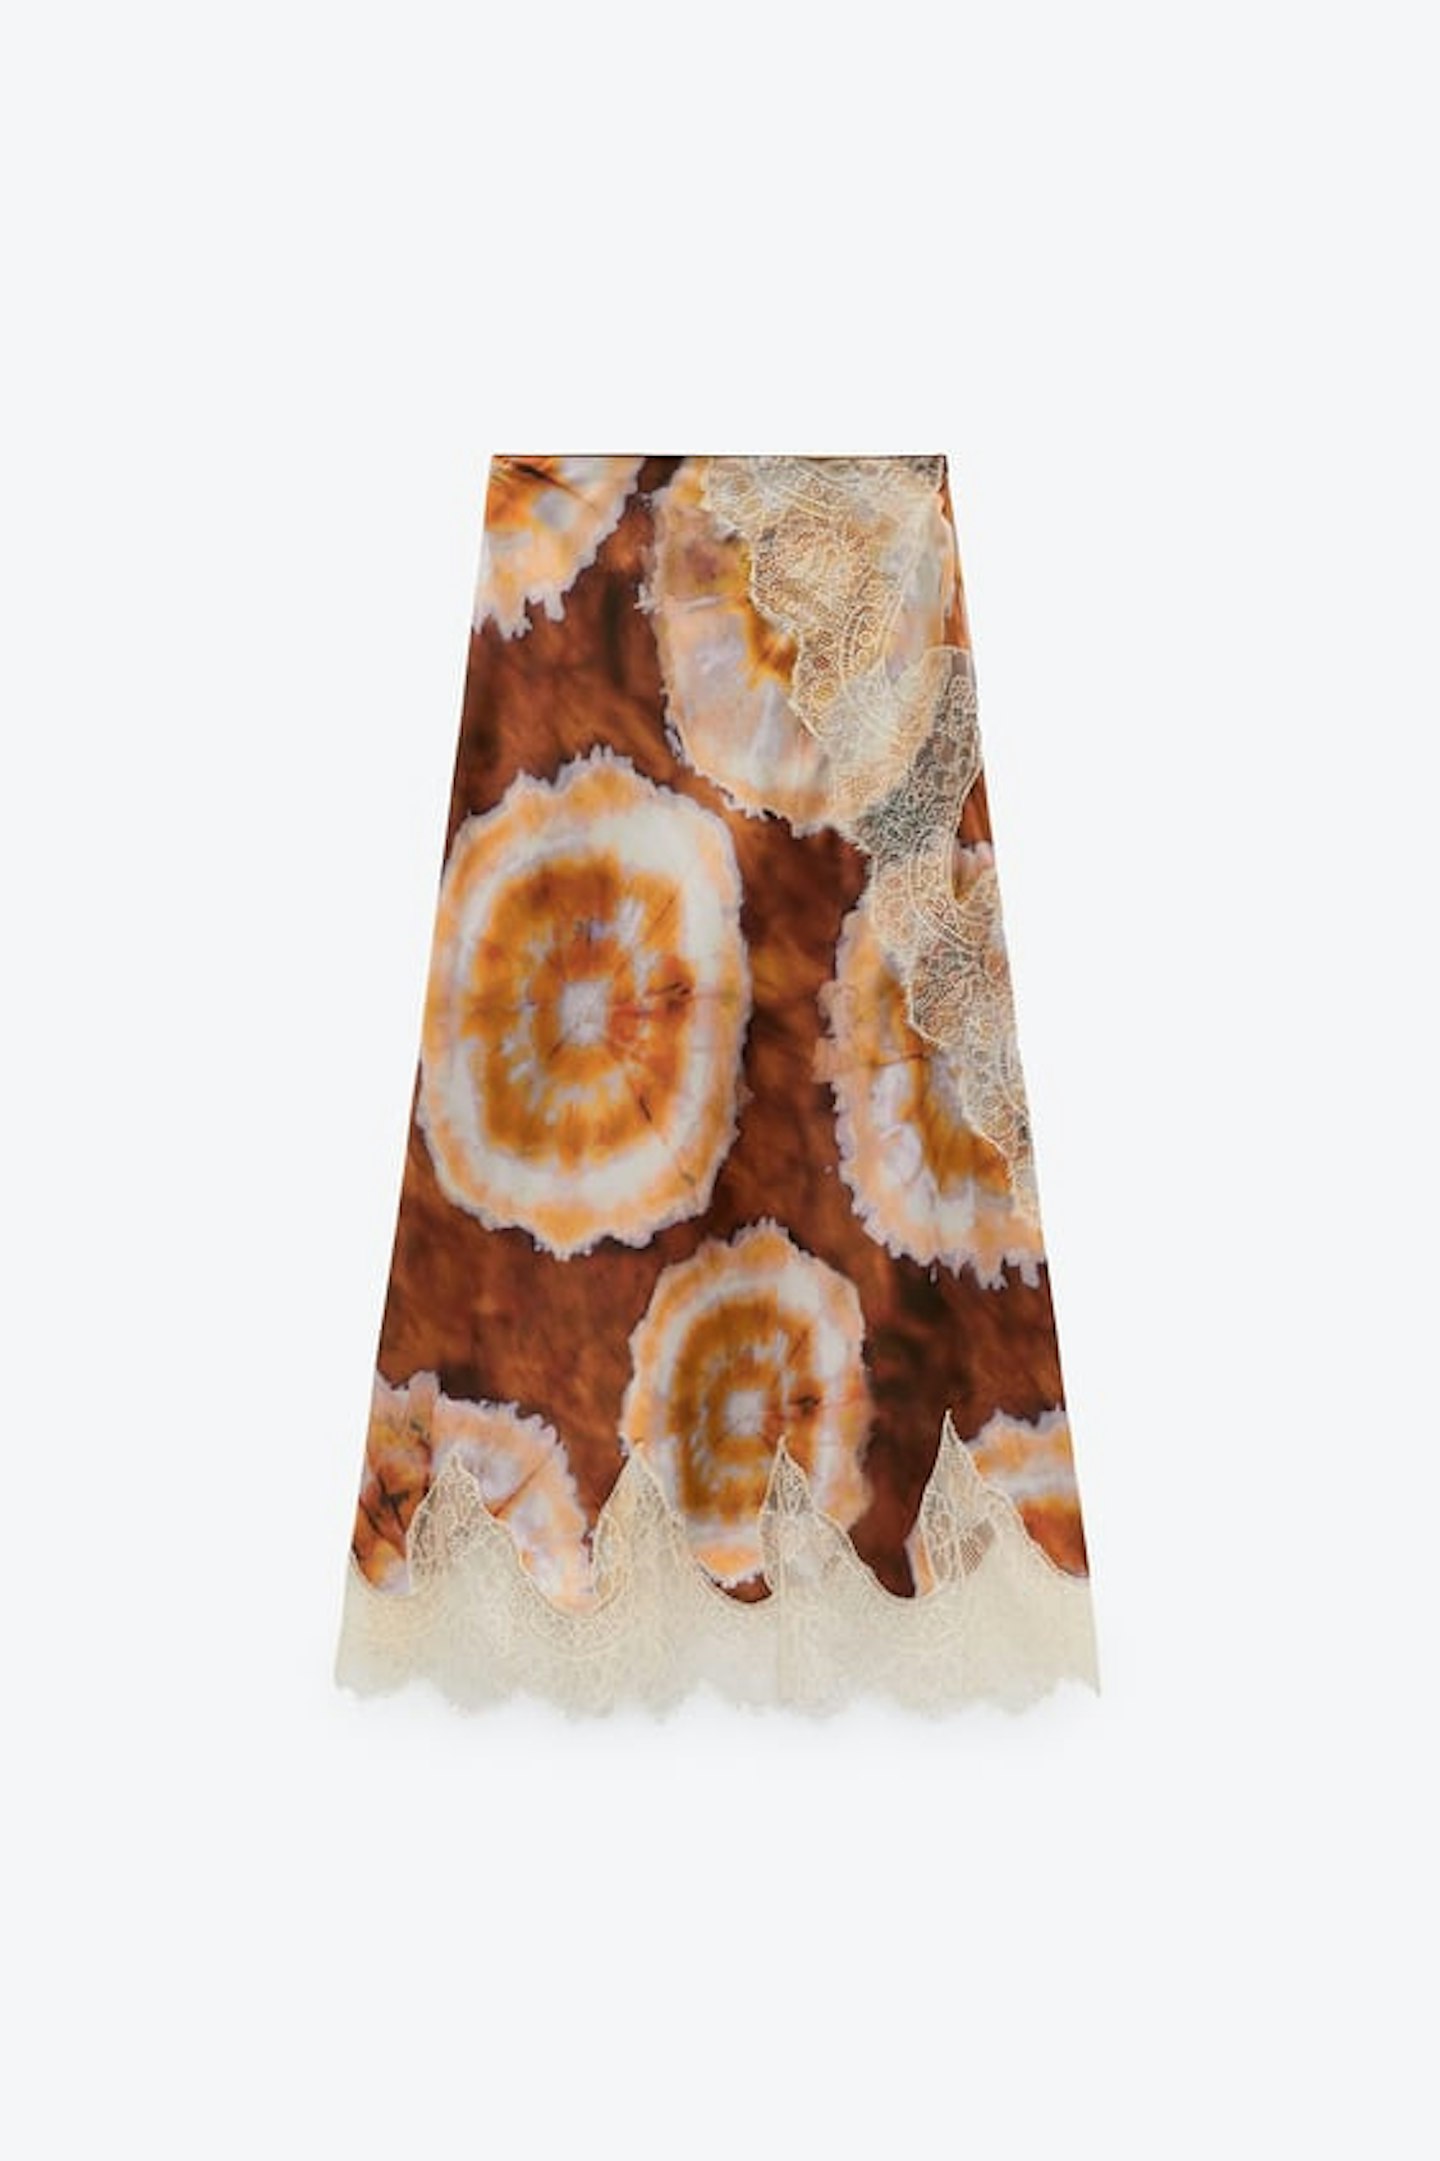 Zara, Printed Skirt With Lace Applique, £49.99